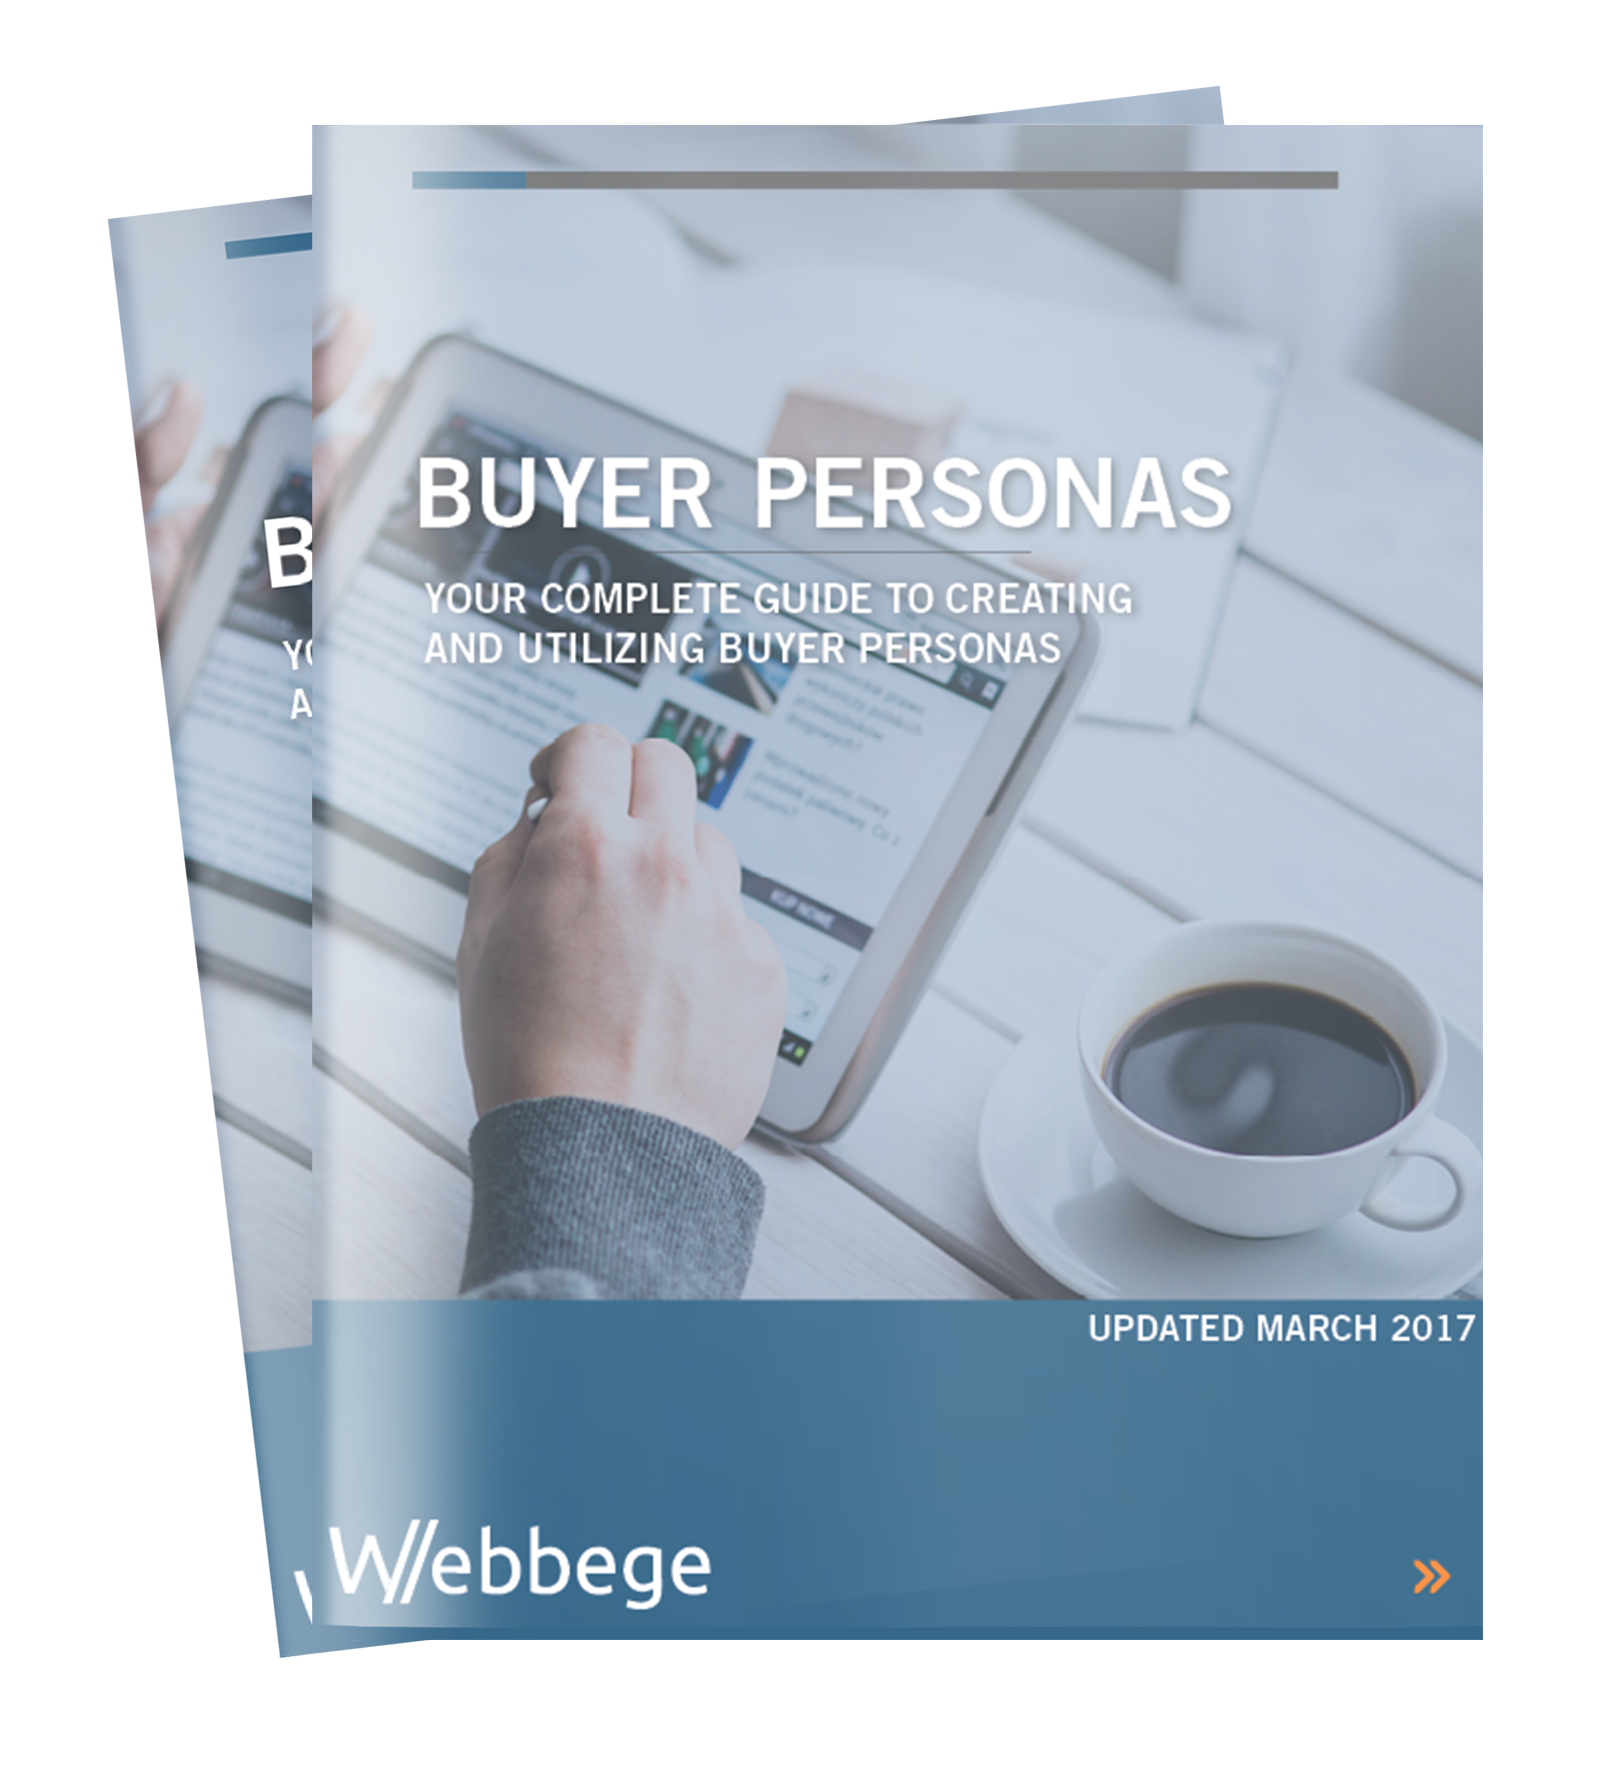 how to create a buyer persona